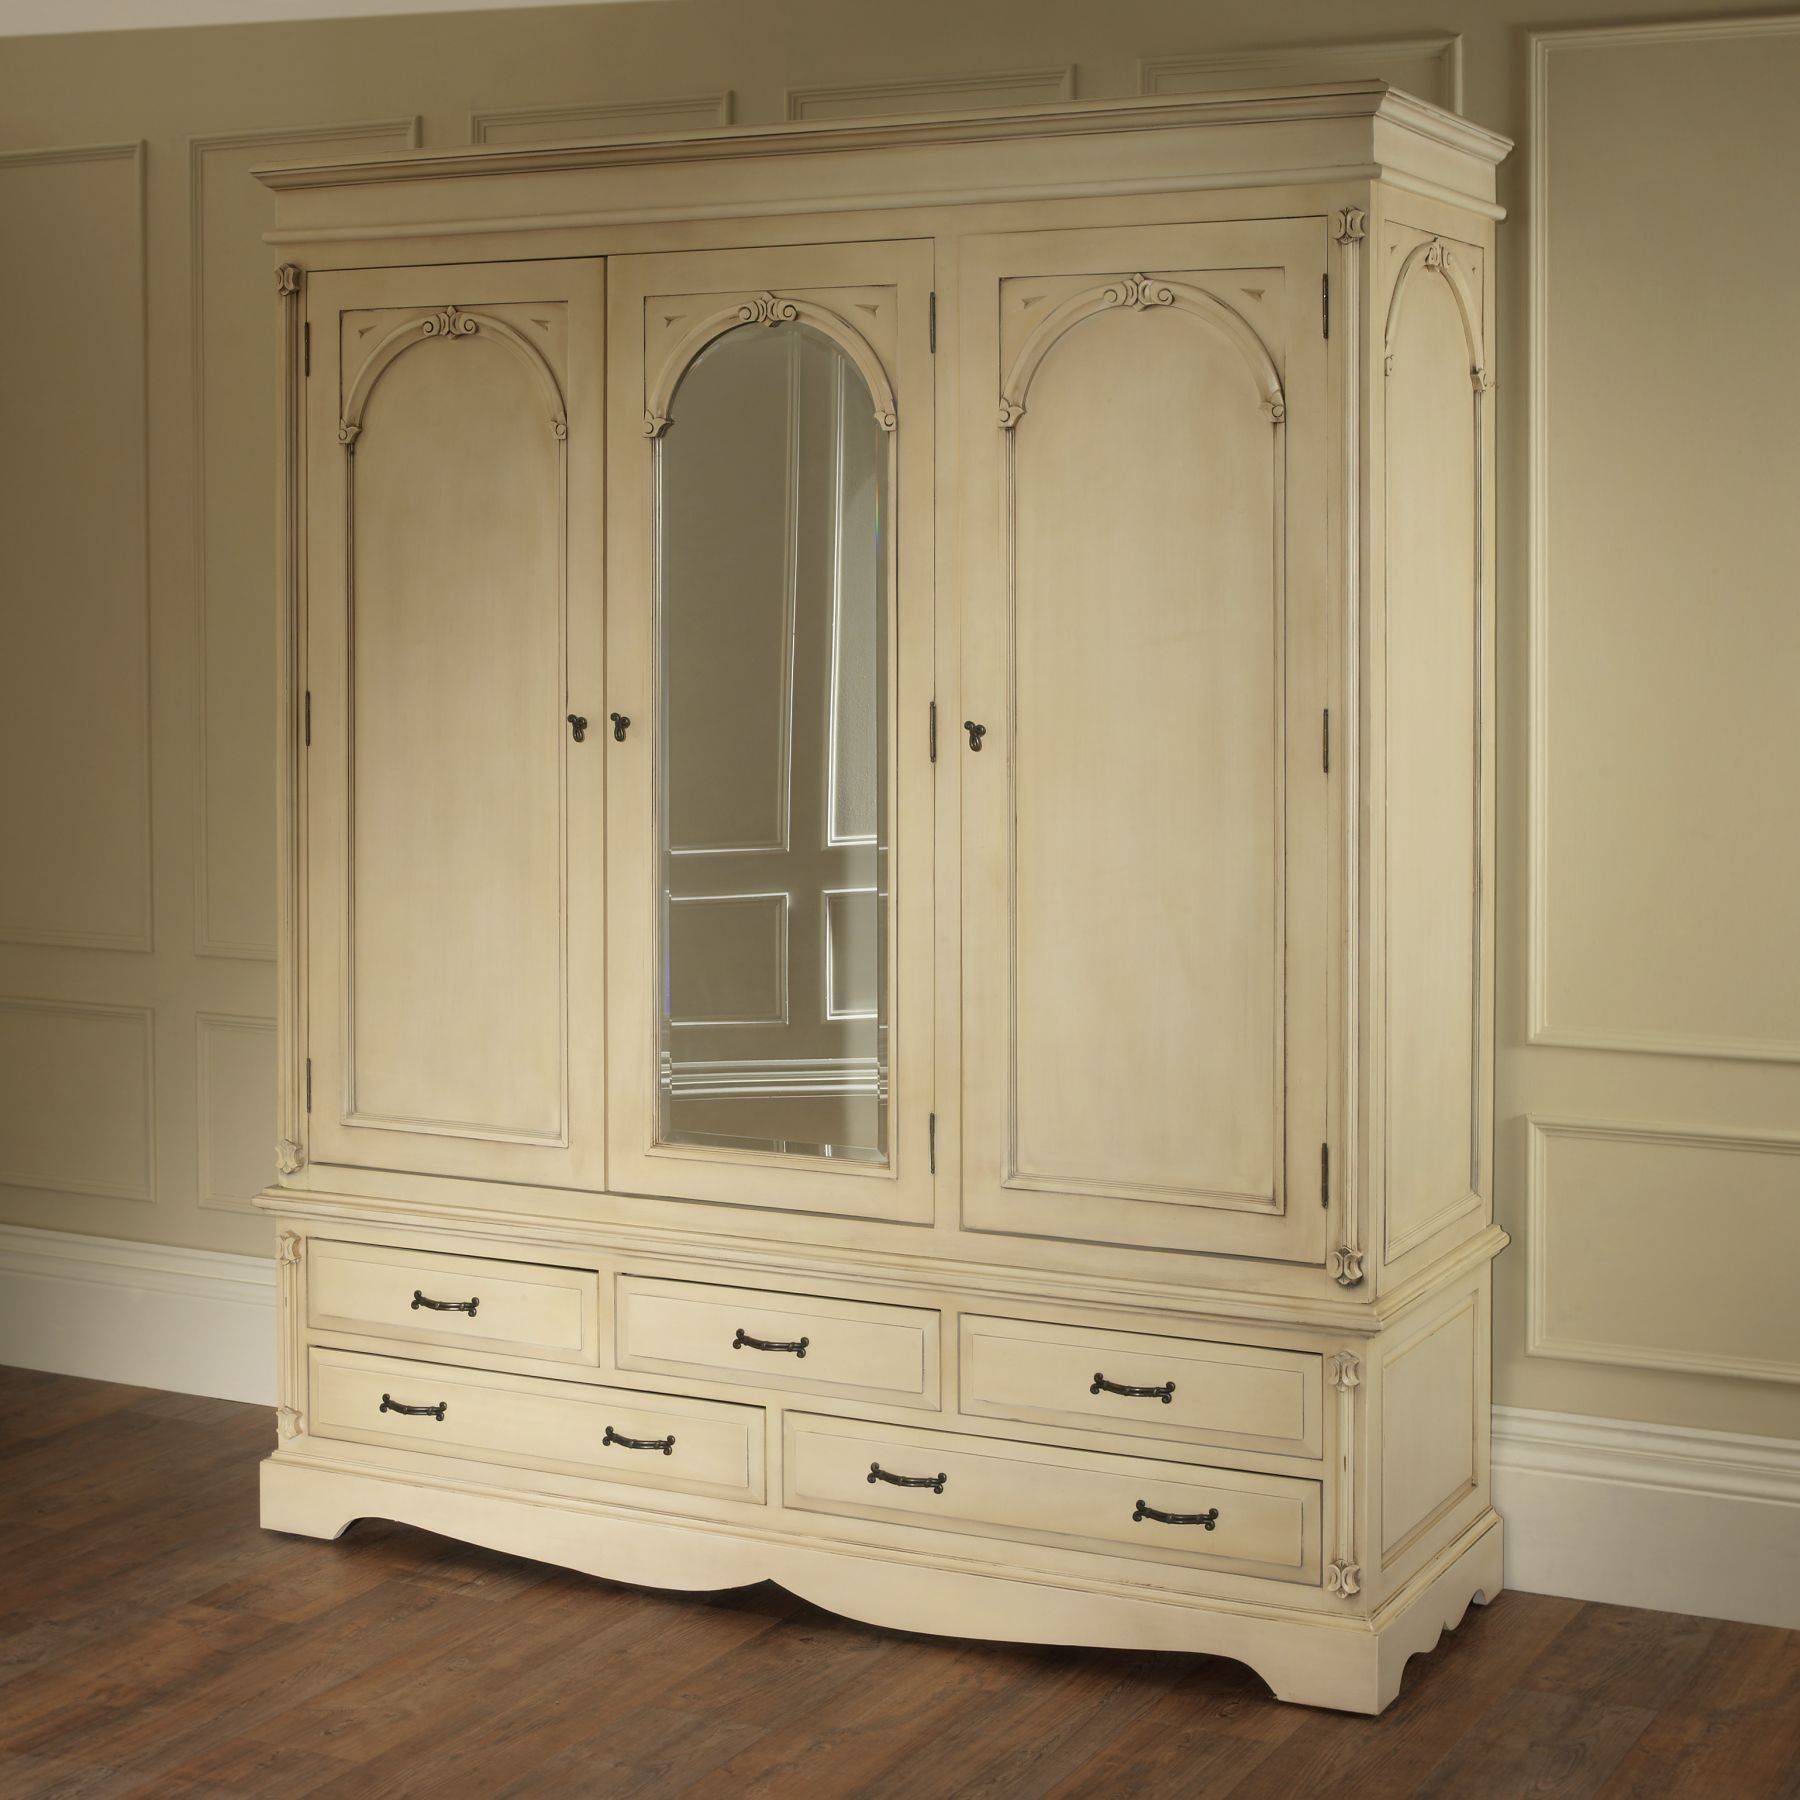 Bedroom Furniture : Shabby Chic Vintage Armoire Wooden Classic Throughout Vintage French Wardrobes (View 10 of 15)